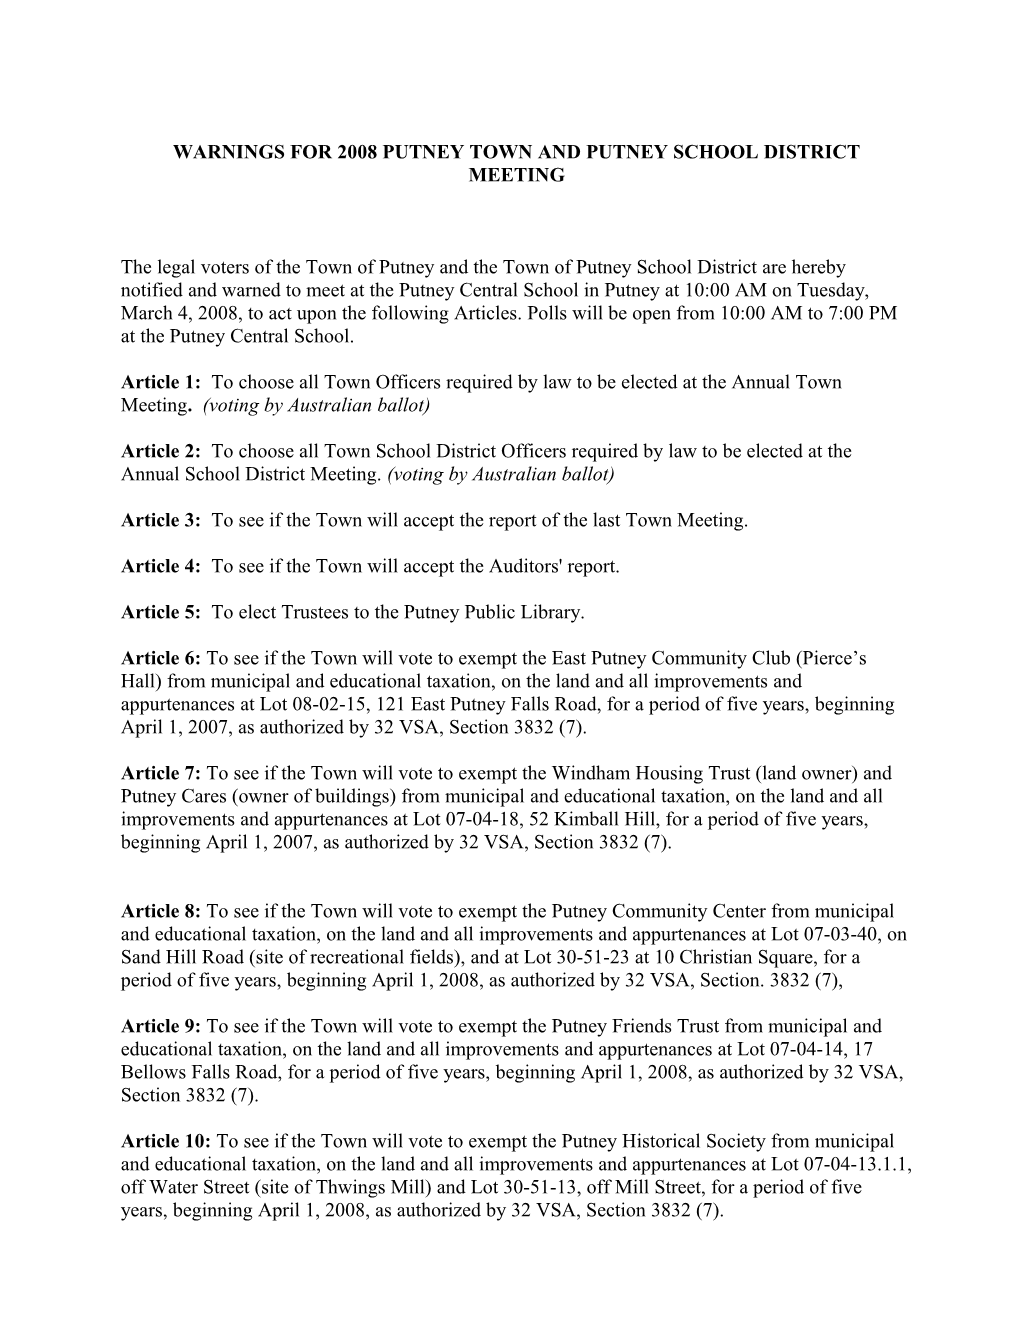 1/19/05 Draft: Warnings for 2005 Putney Town and Putney School District